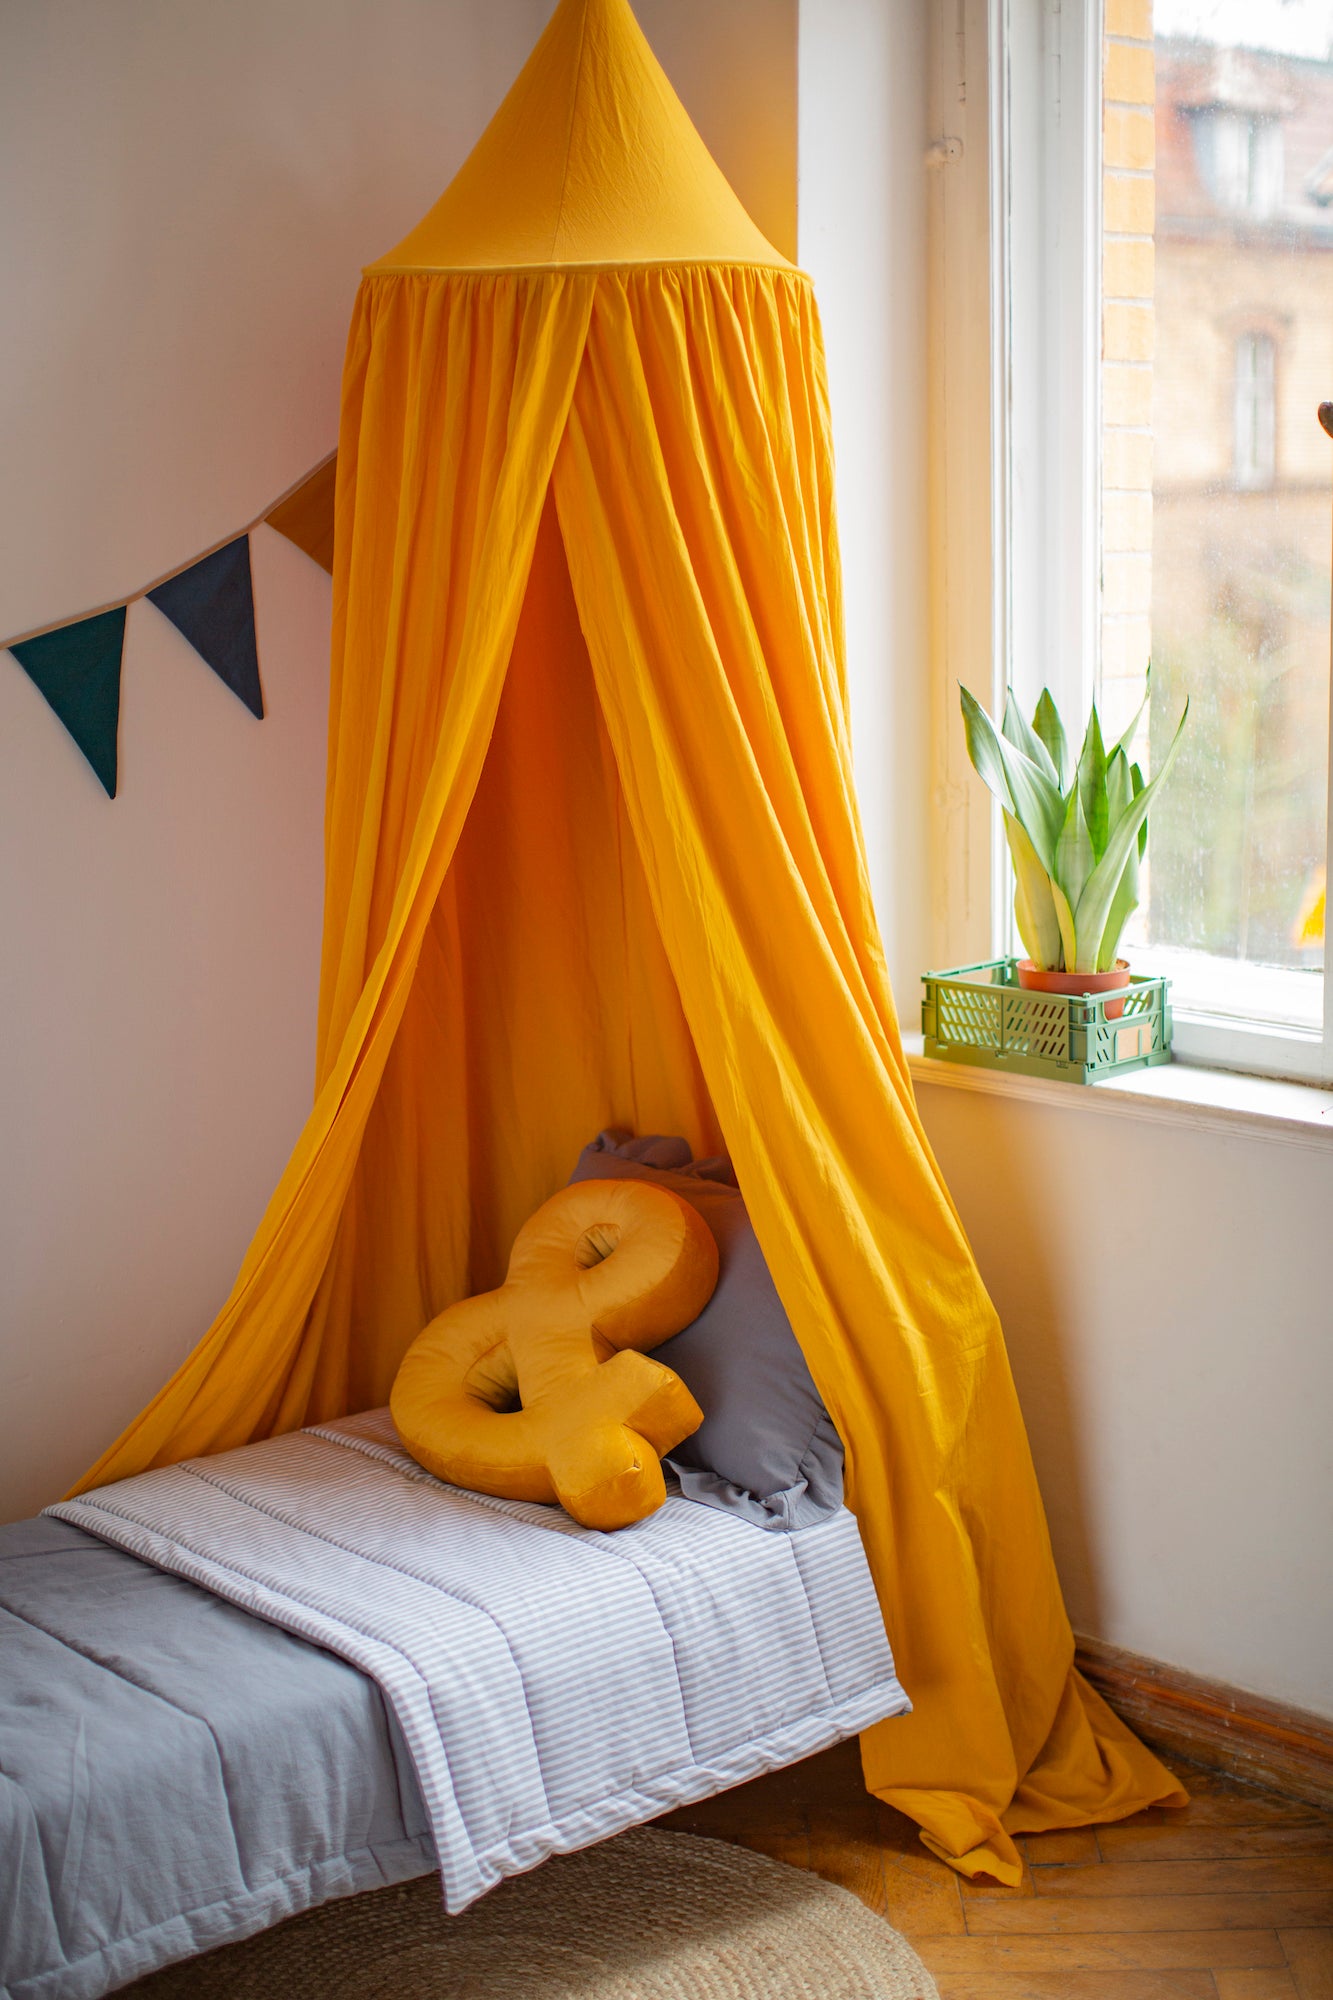 Velvet Letter Cushion & by Bettys Home on kids bed under beautiful yellow canopy and garland. Birthday present ideas for her